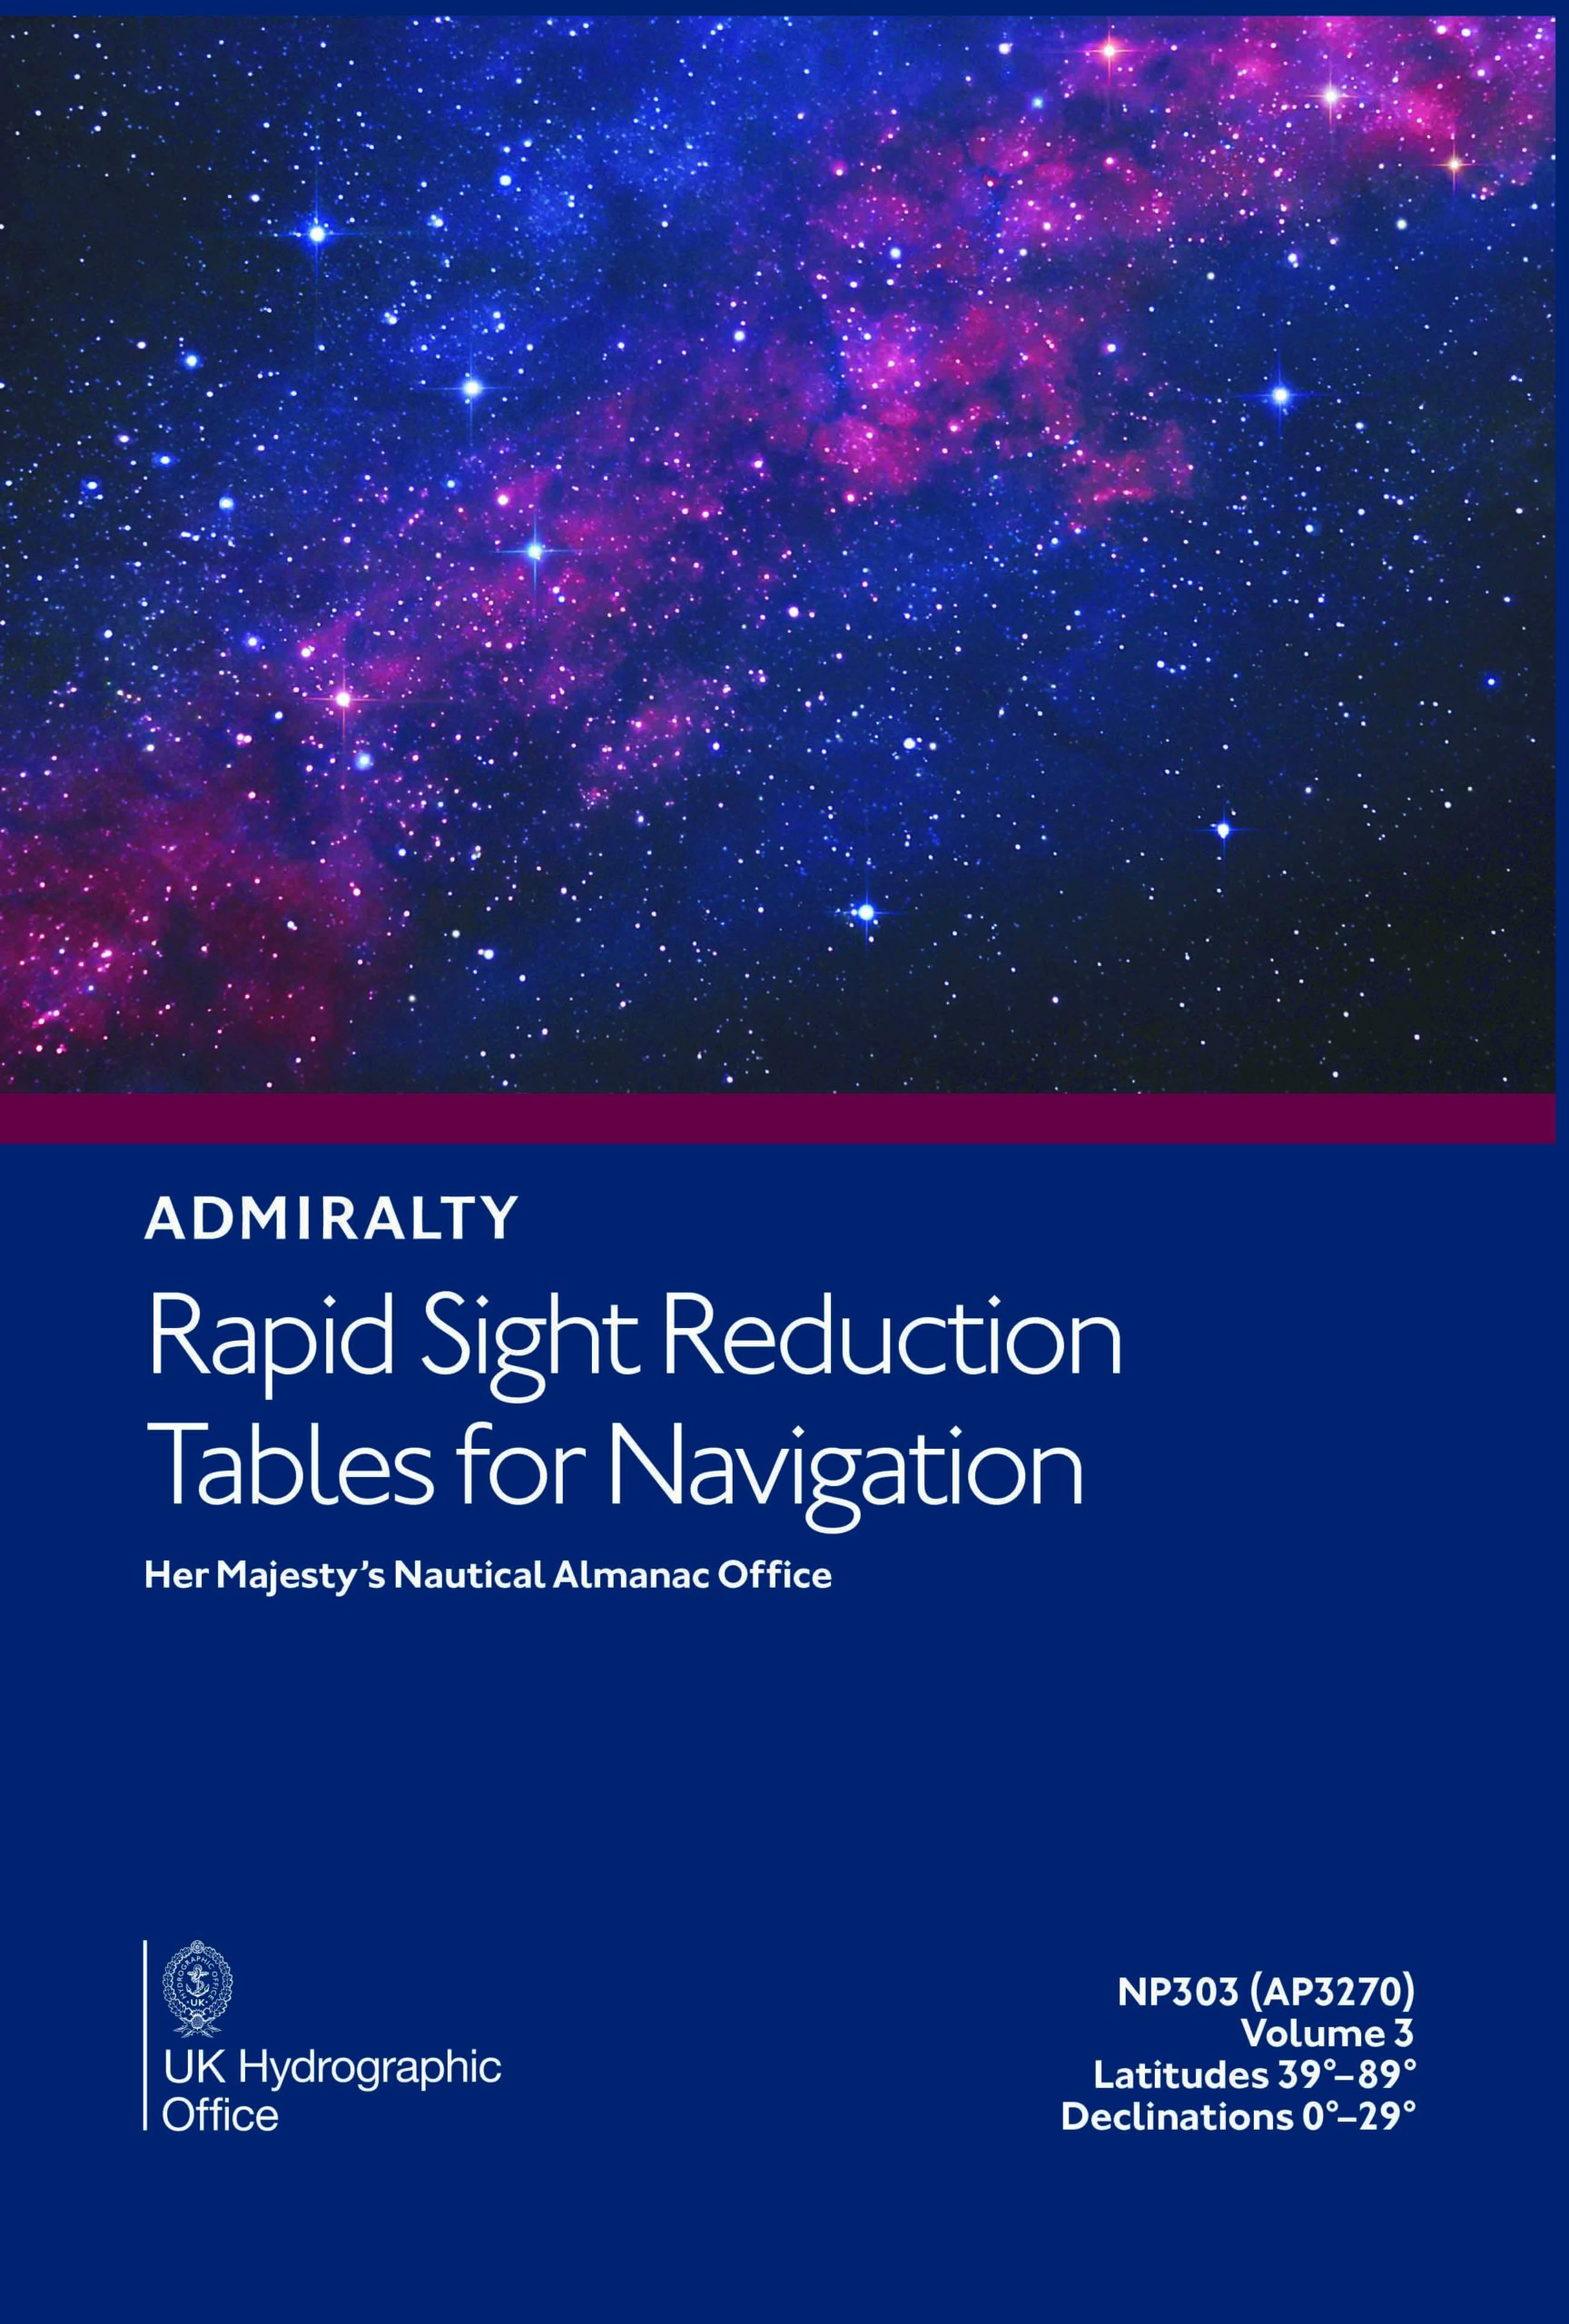 NP303 Admiralty Rapid Sight Reduction Tables for Navigation Vol 3